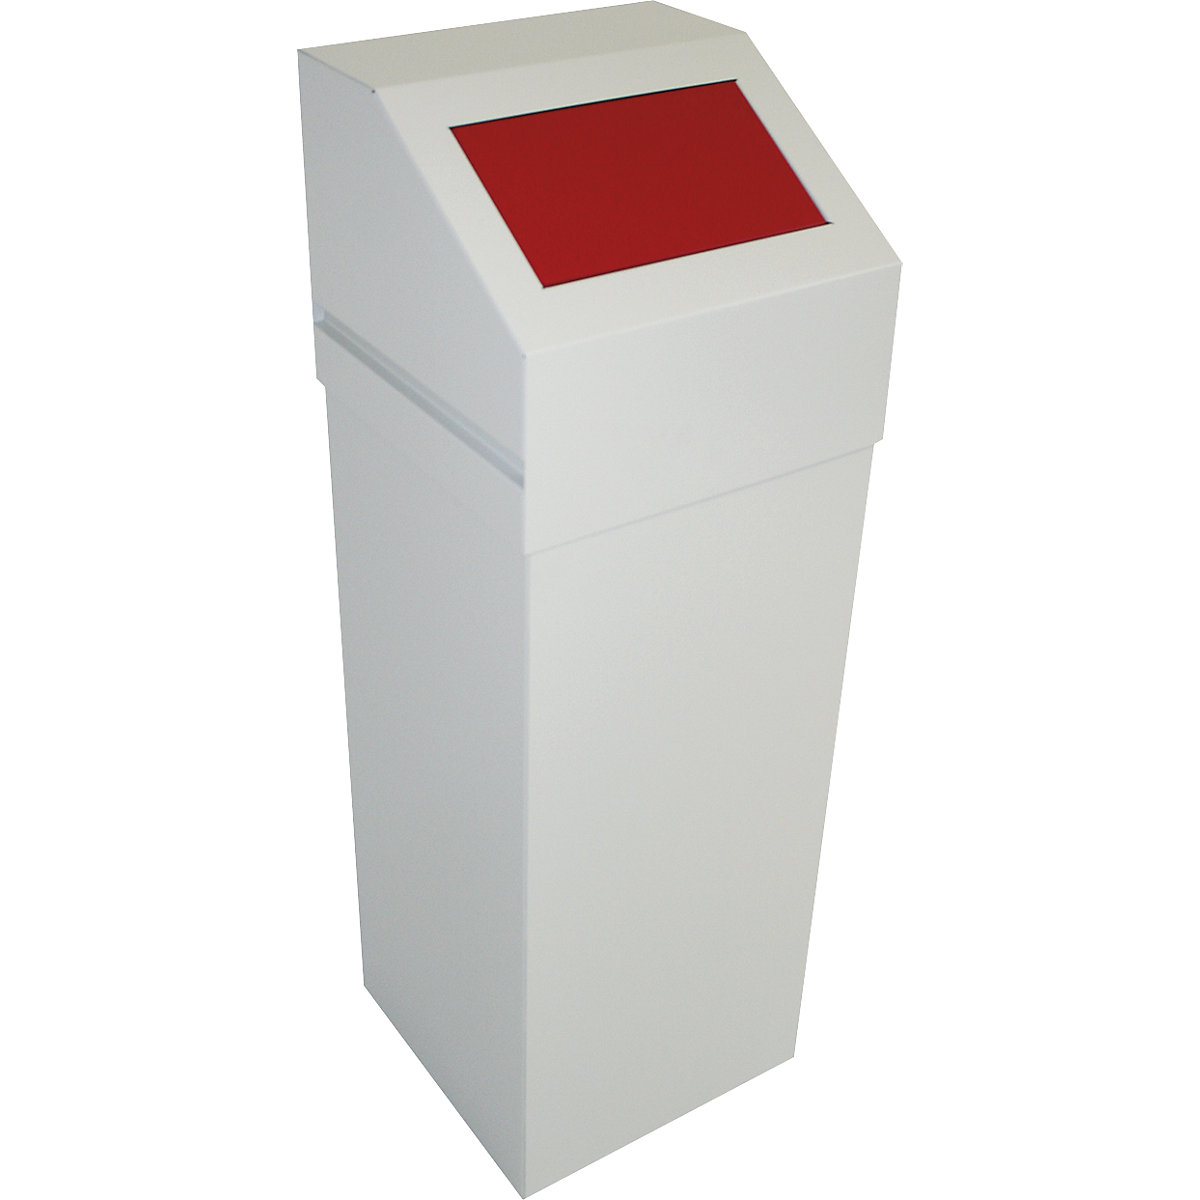 Waste separation system, capacity 65 l, with red lid